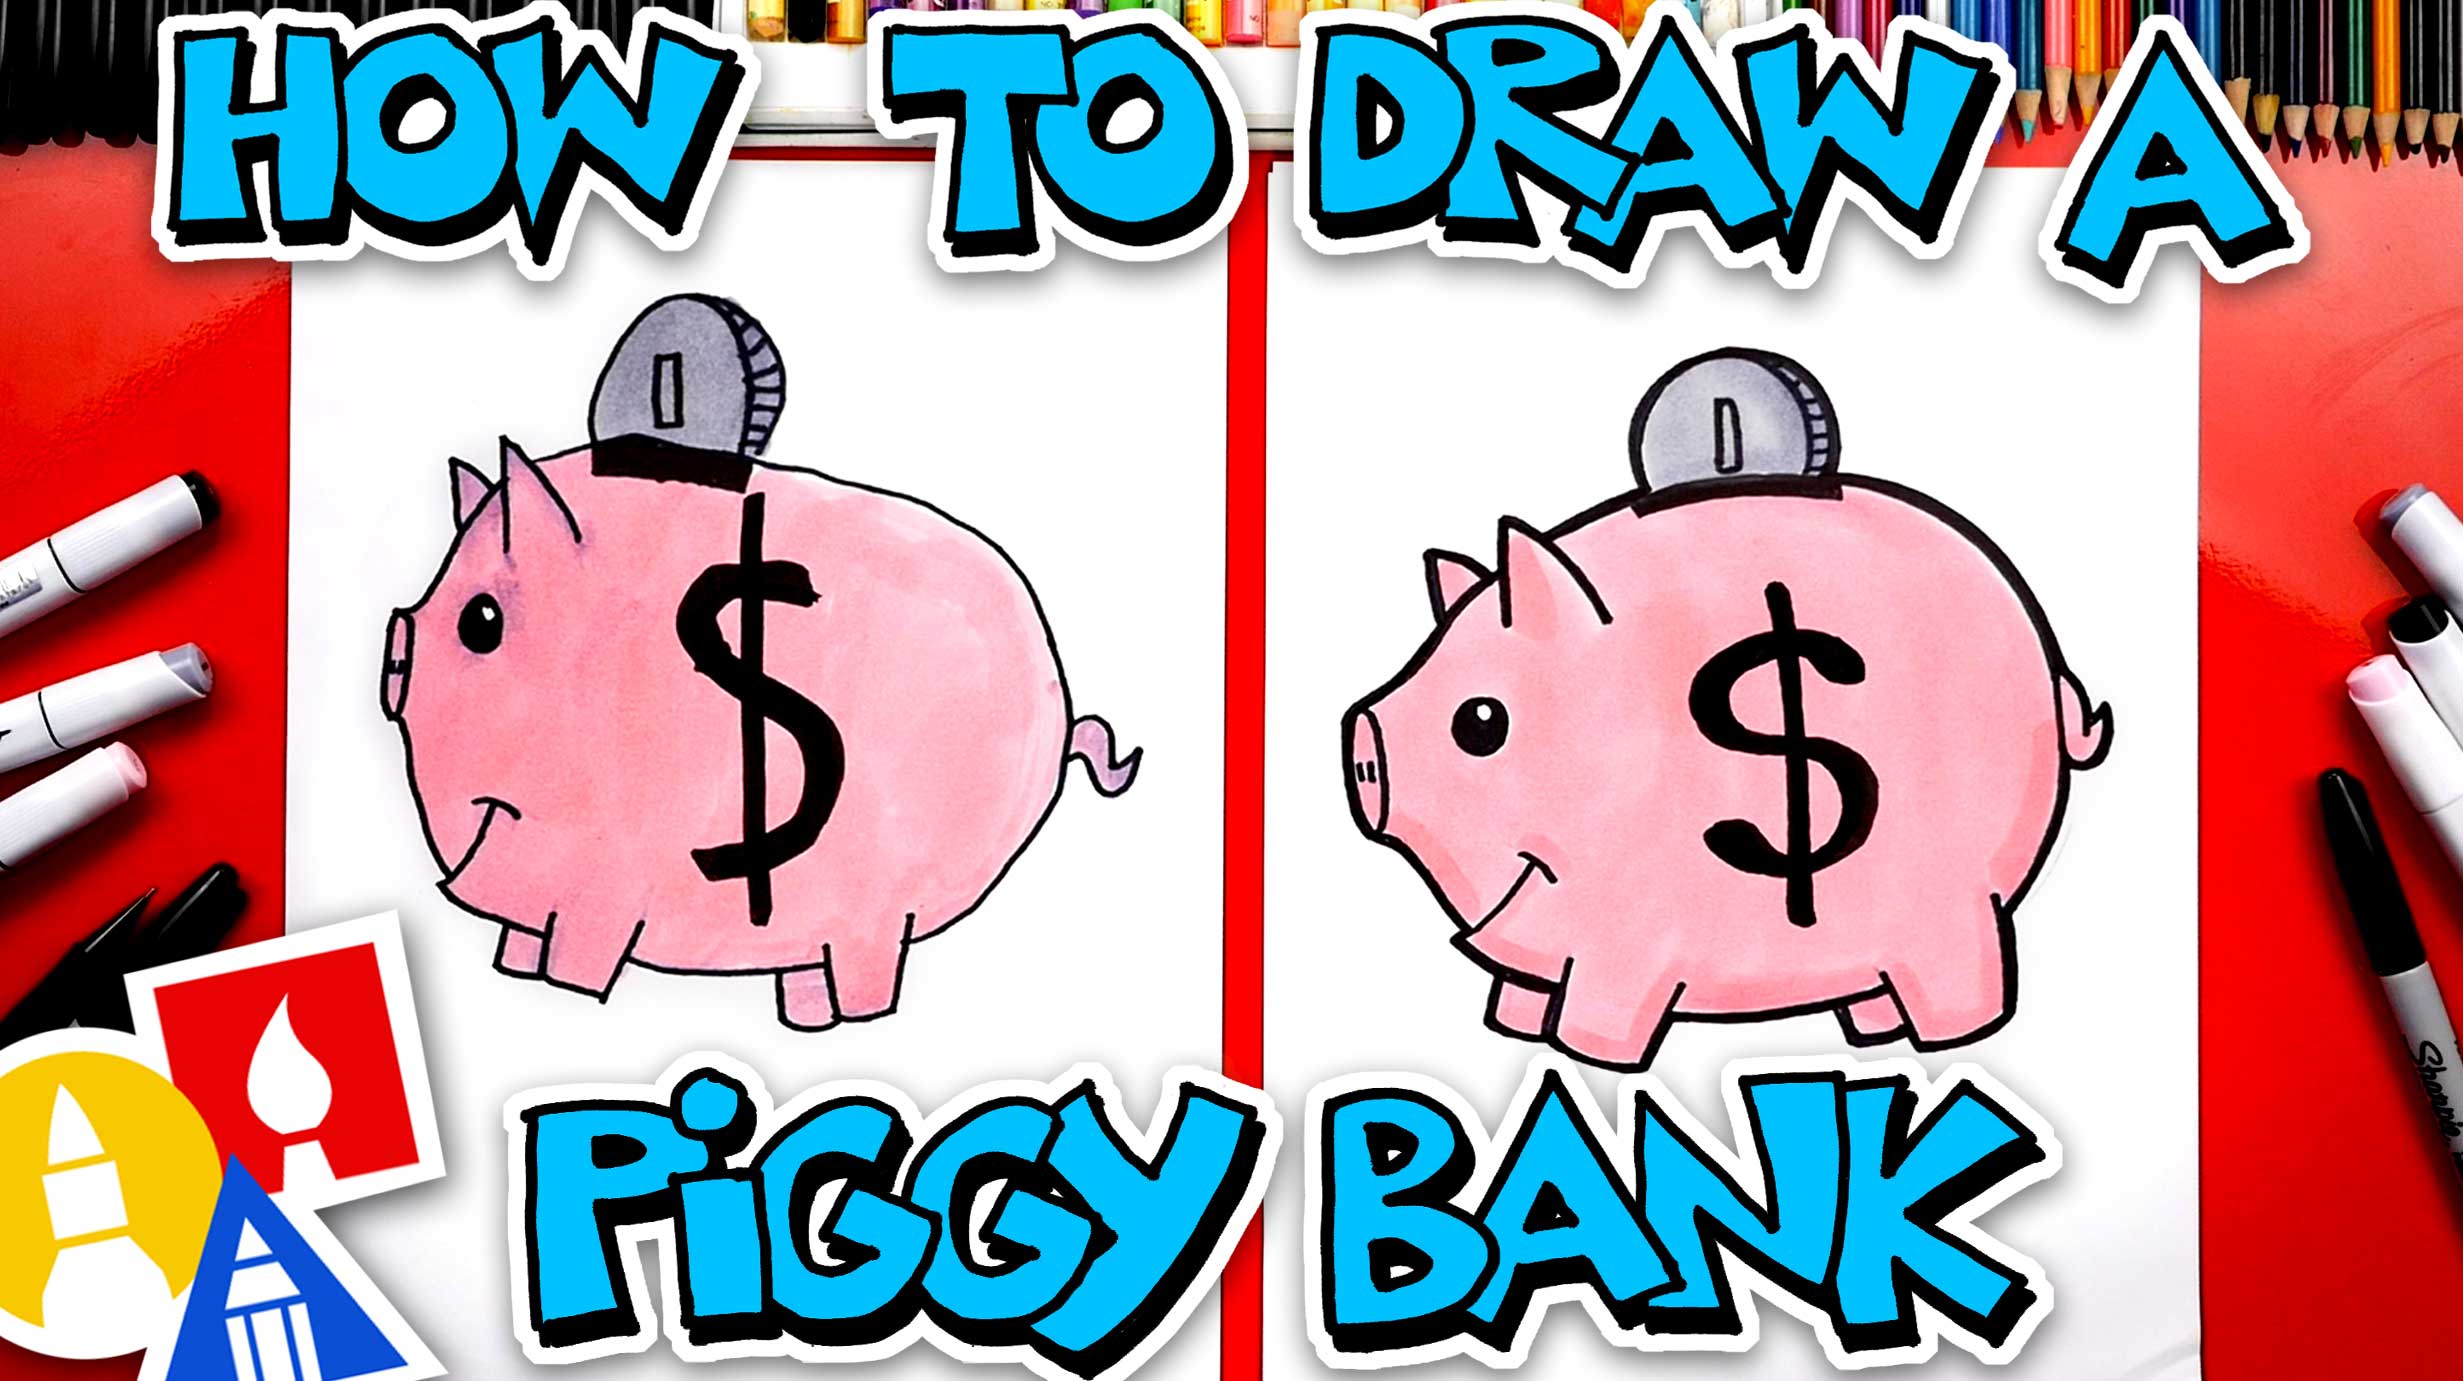 How To Draw A Piggy Bank Art For Kids Hub